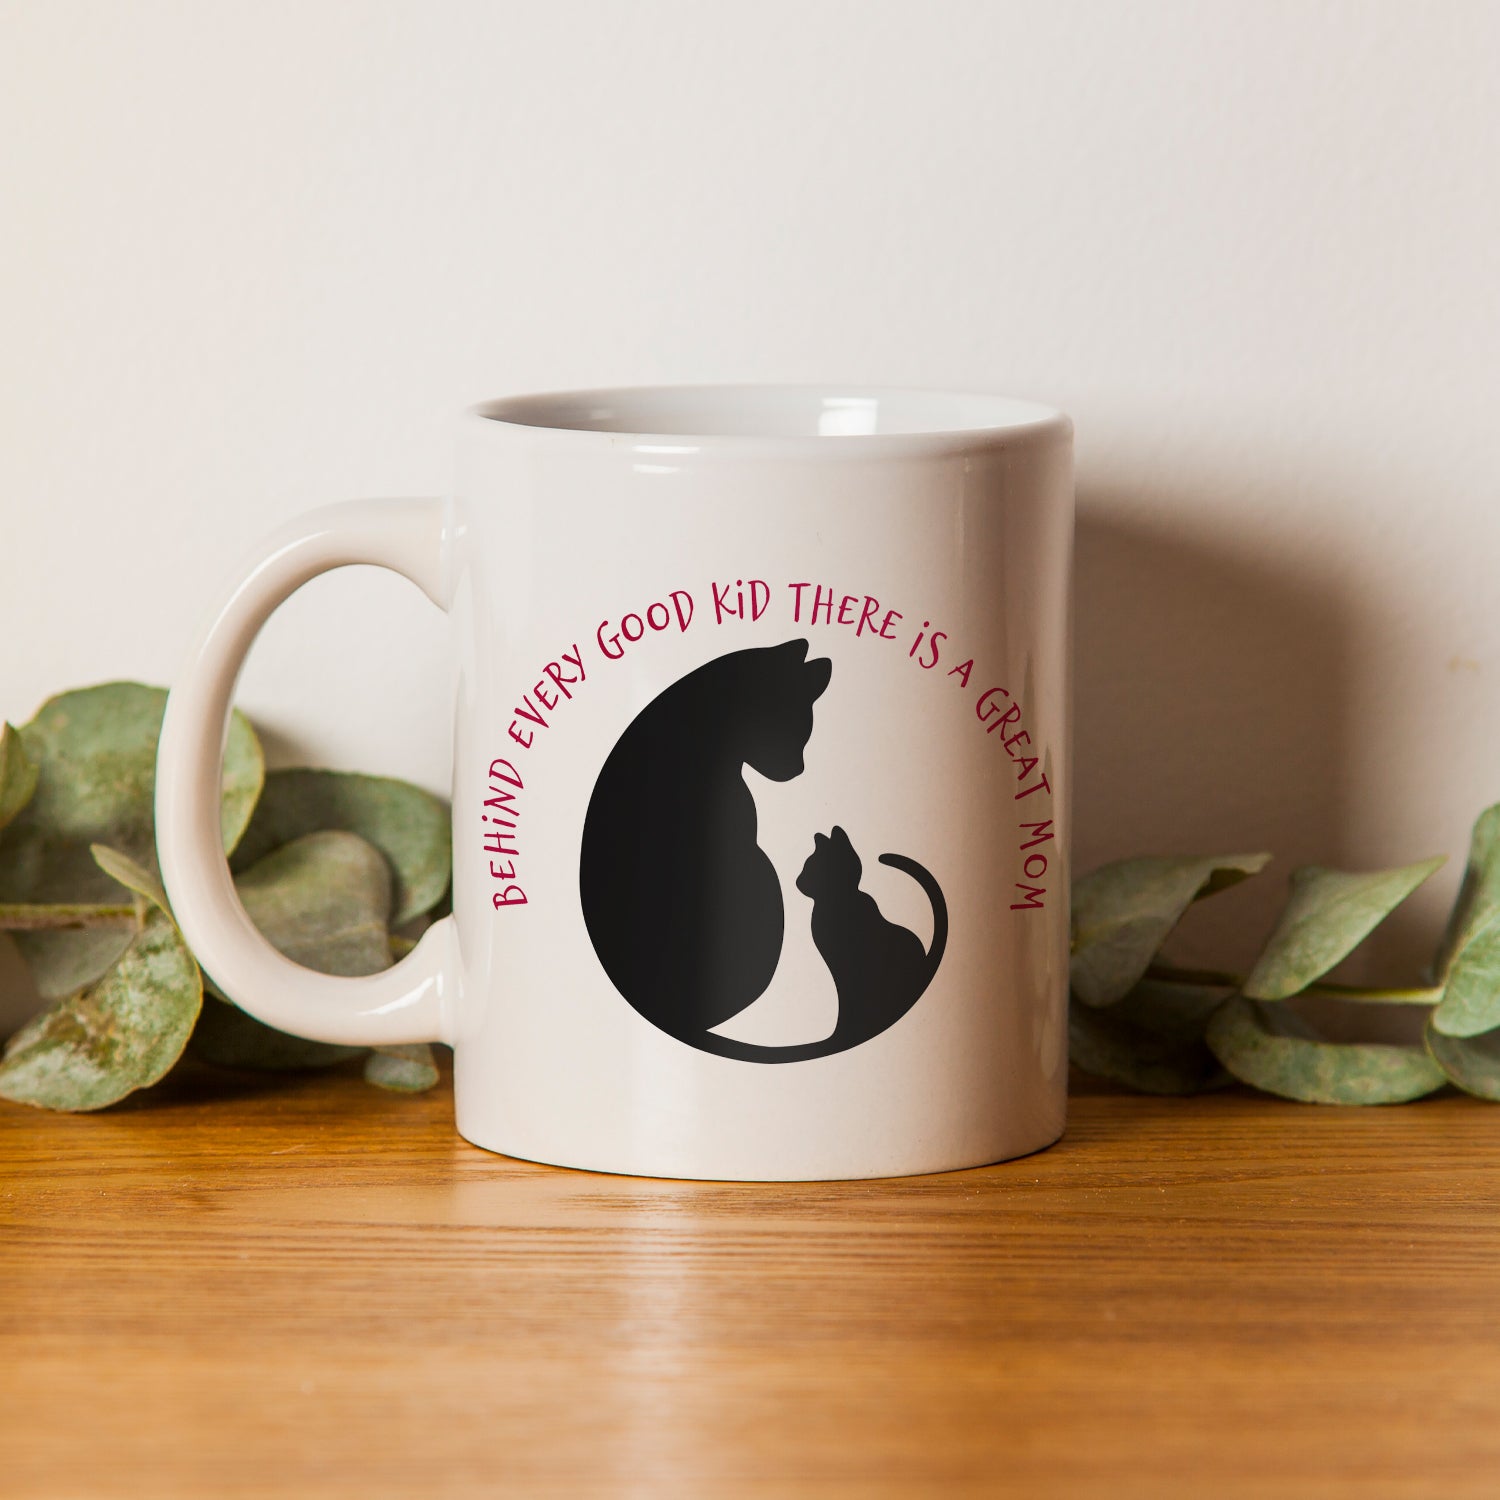 "Behind every good kid there is a great mom" Mother's Day theme Ceramic Coffee Mugs 1